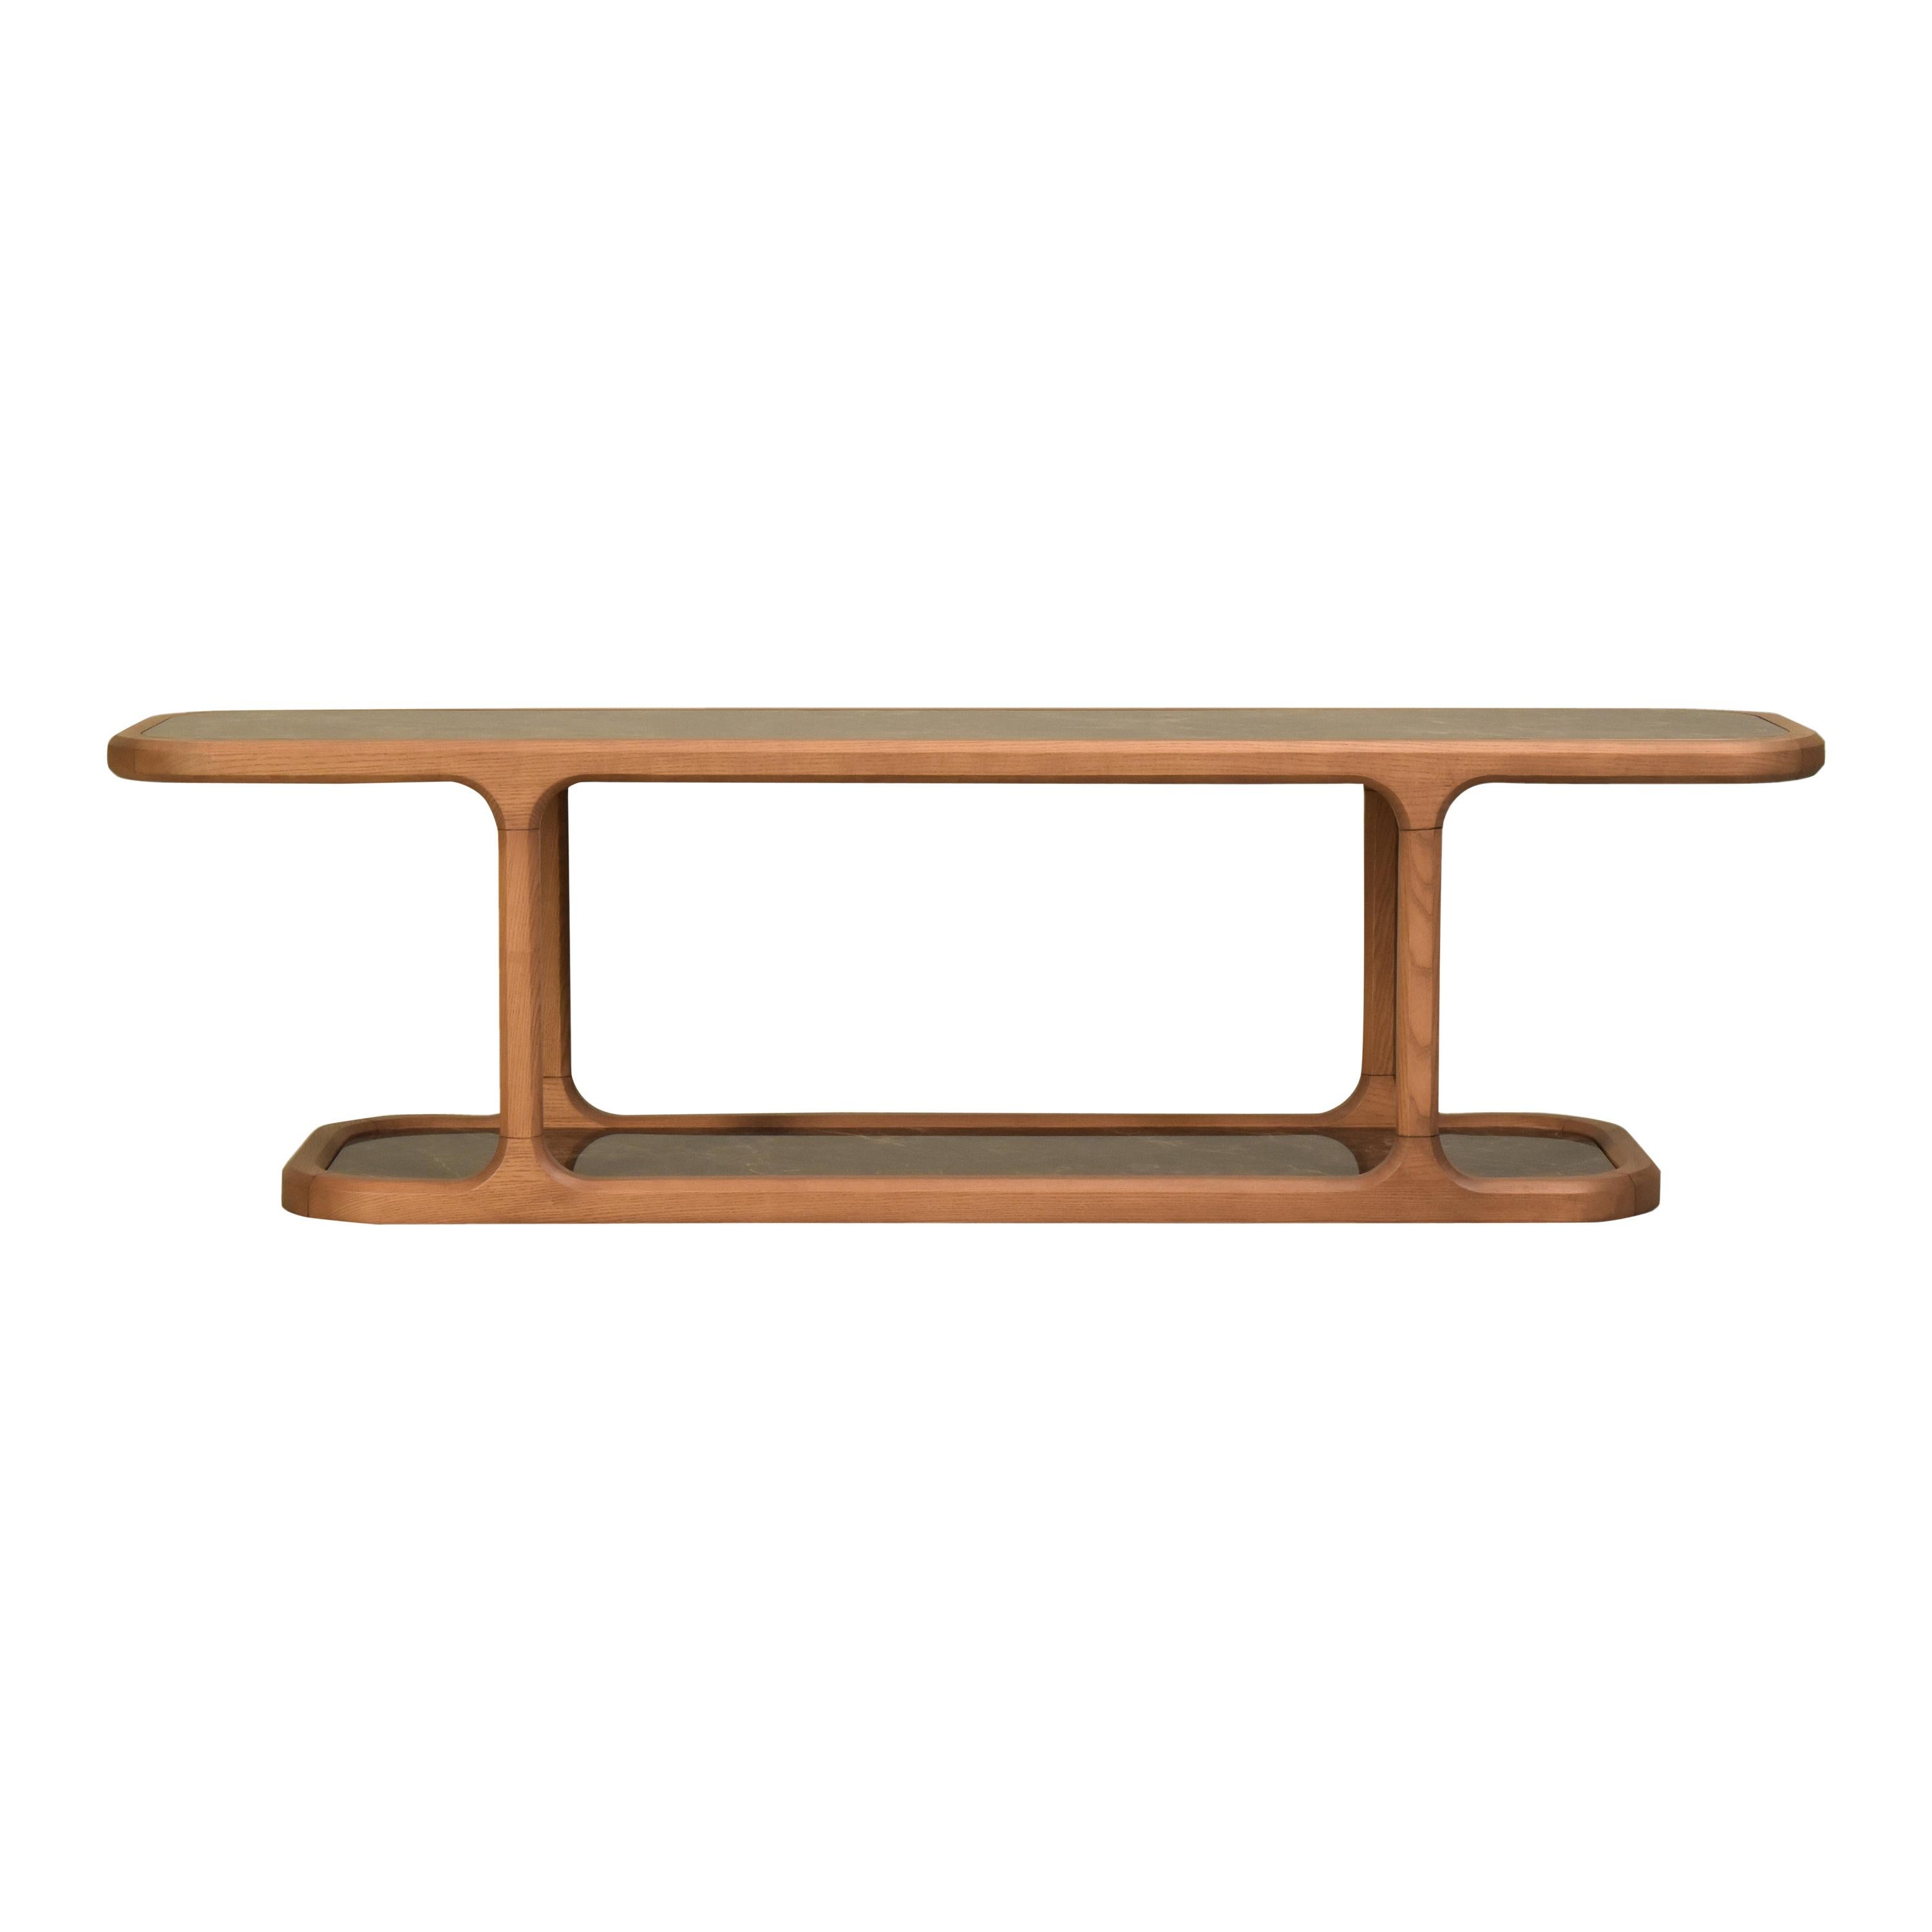 Bellagio Low Table, Made of Ashwood